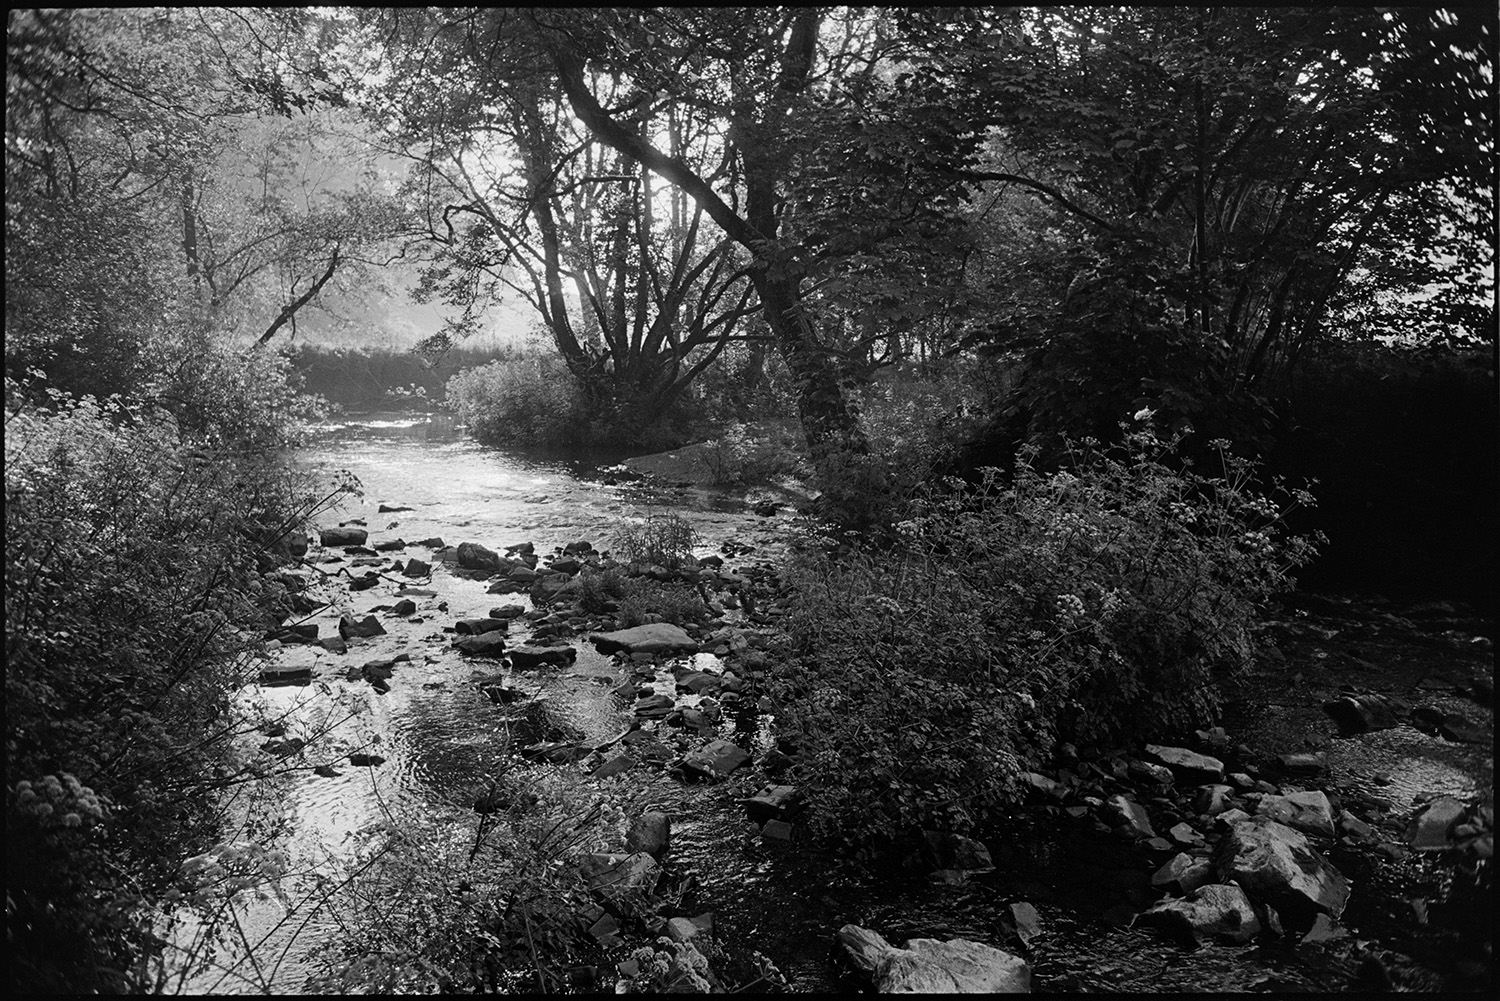 Stony river with plants. Trees growing overhead. Misty morning.
[The River Taw with stony river bed flowing past trees and wild flowers at Eggesford.]